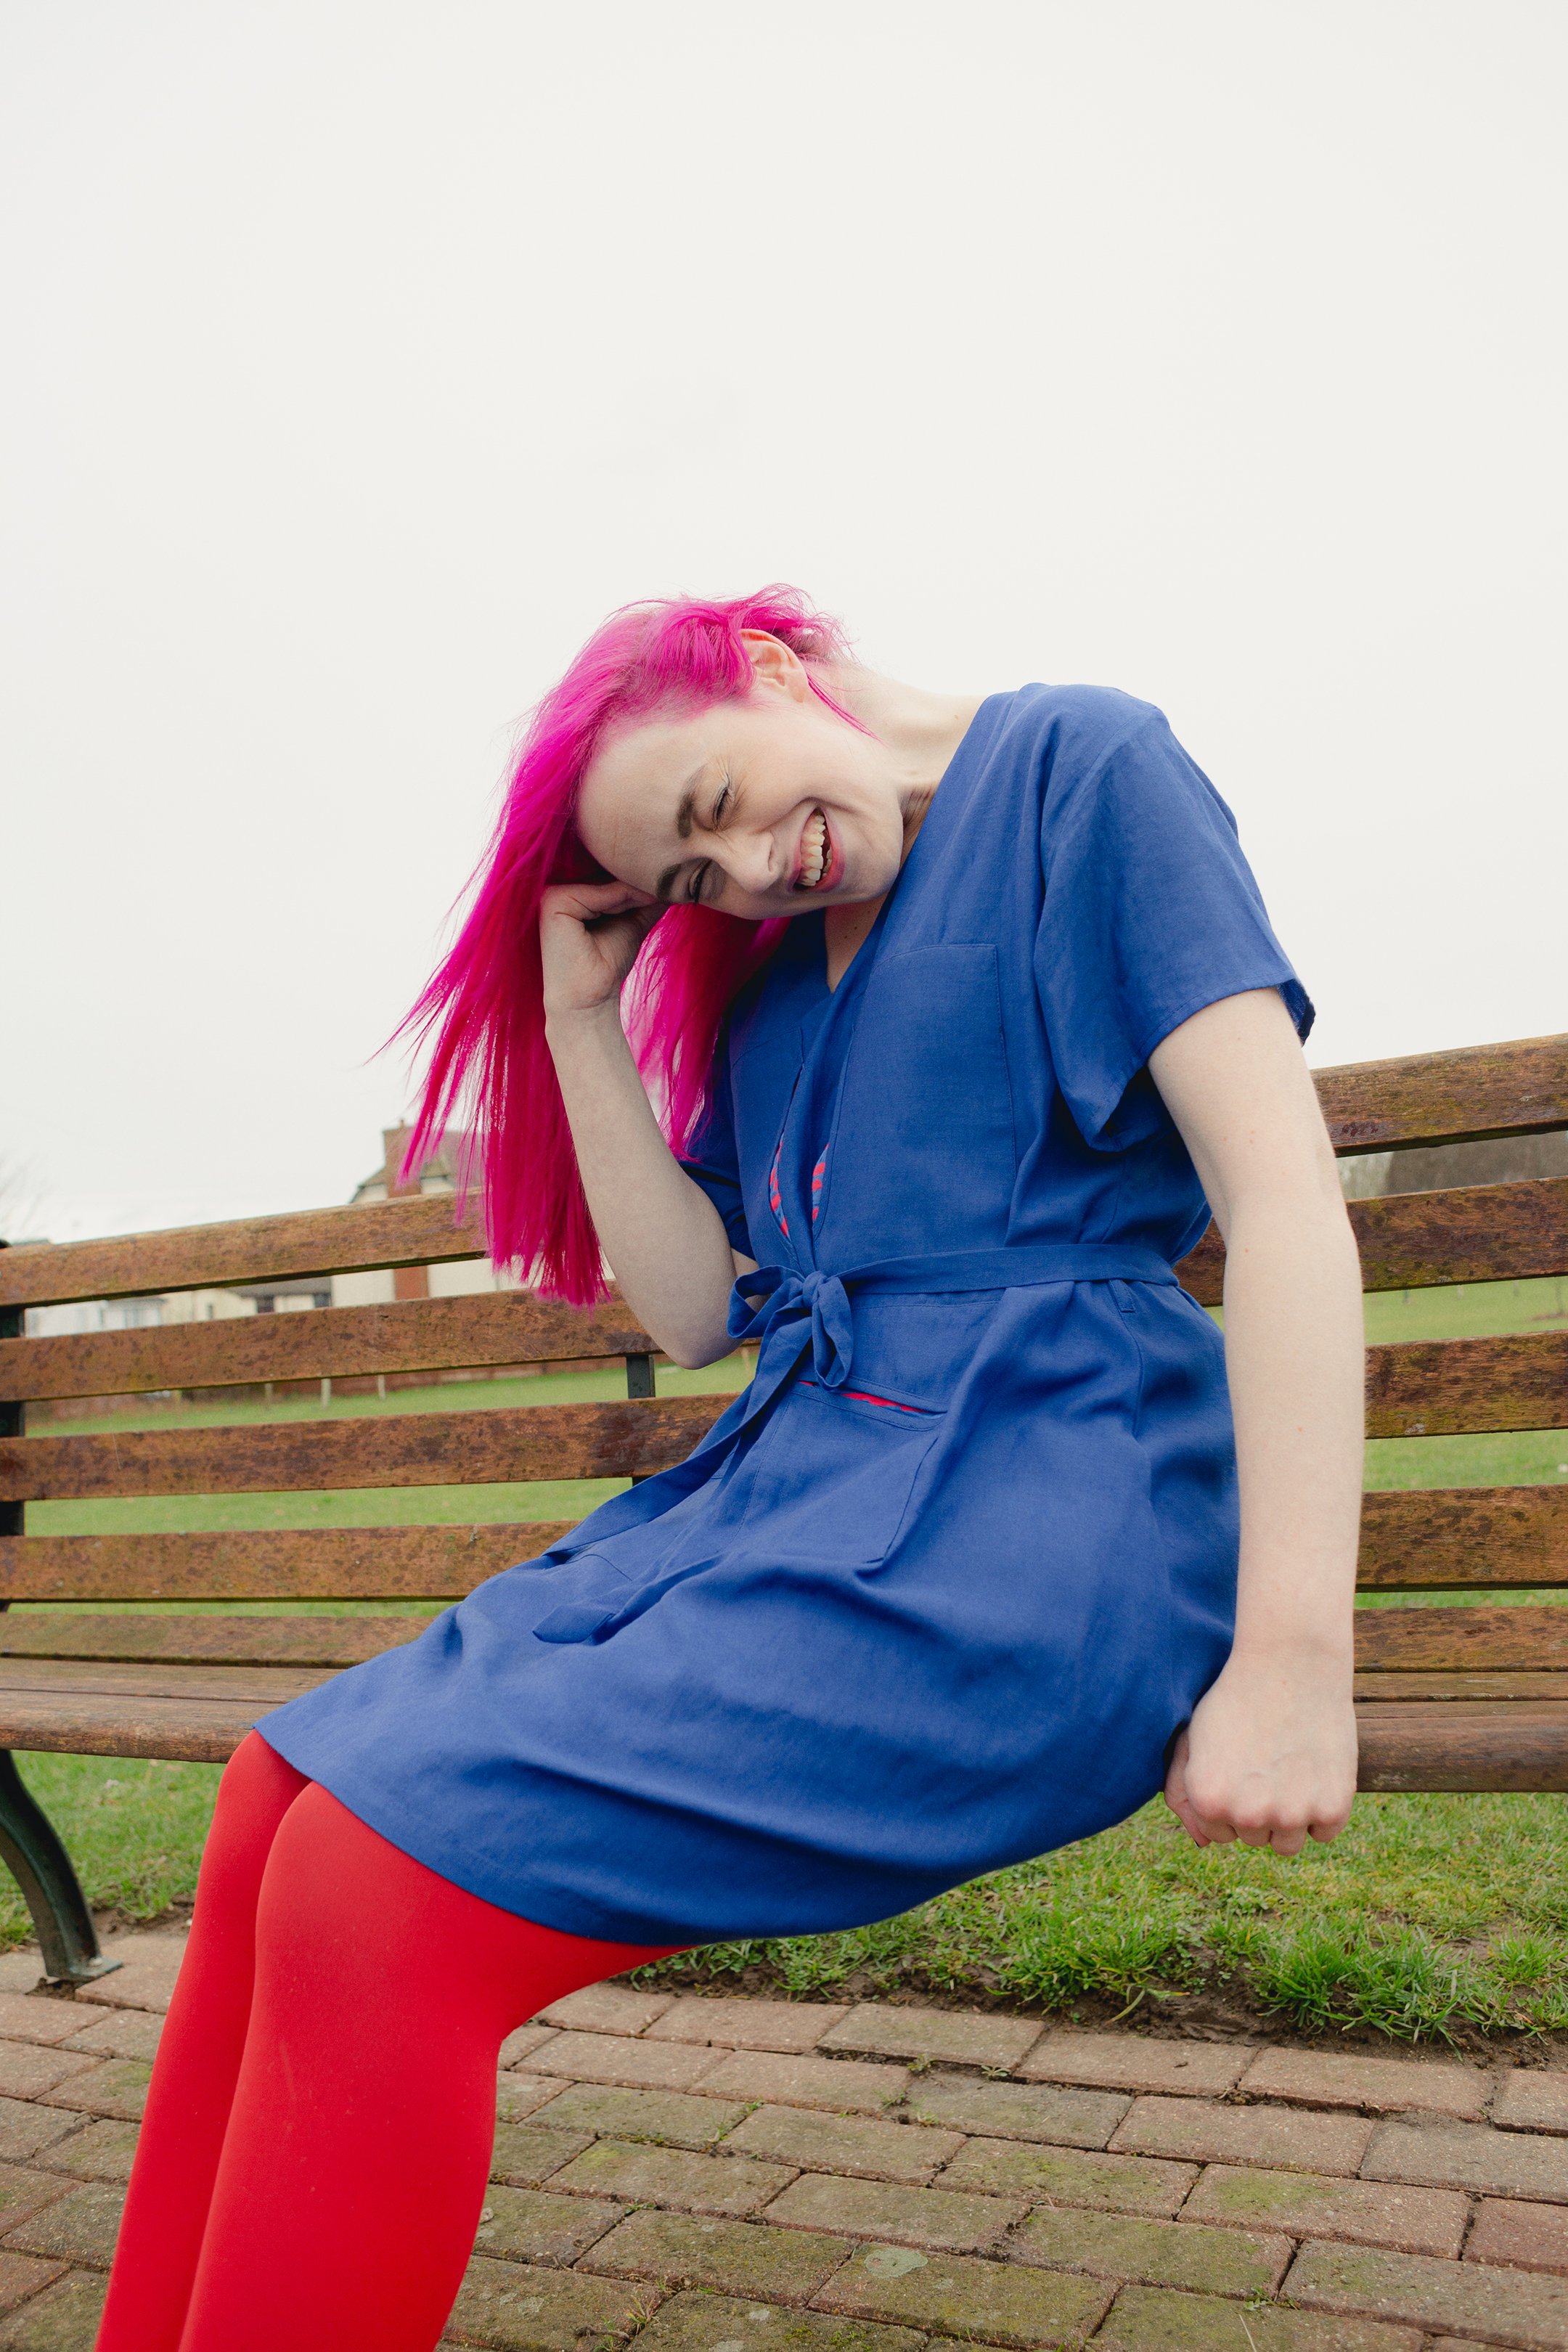 Emma Lawton wears a blue print dress by [Reset] with her own red tights